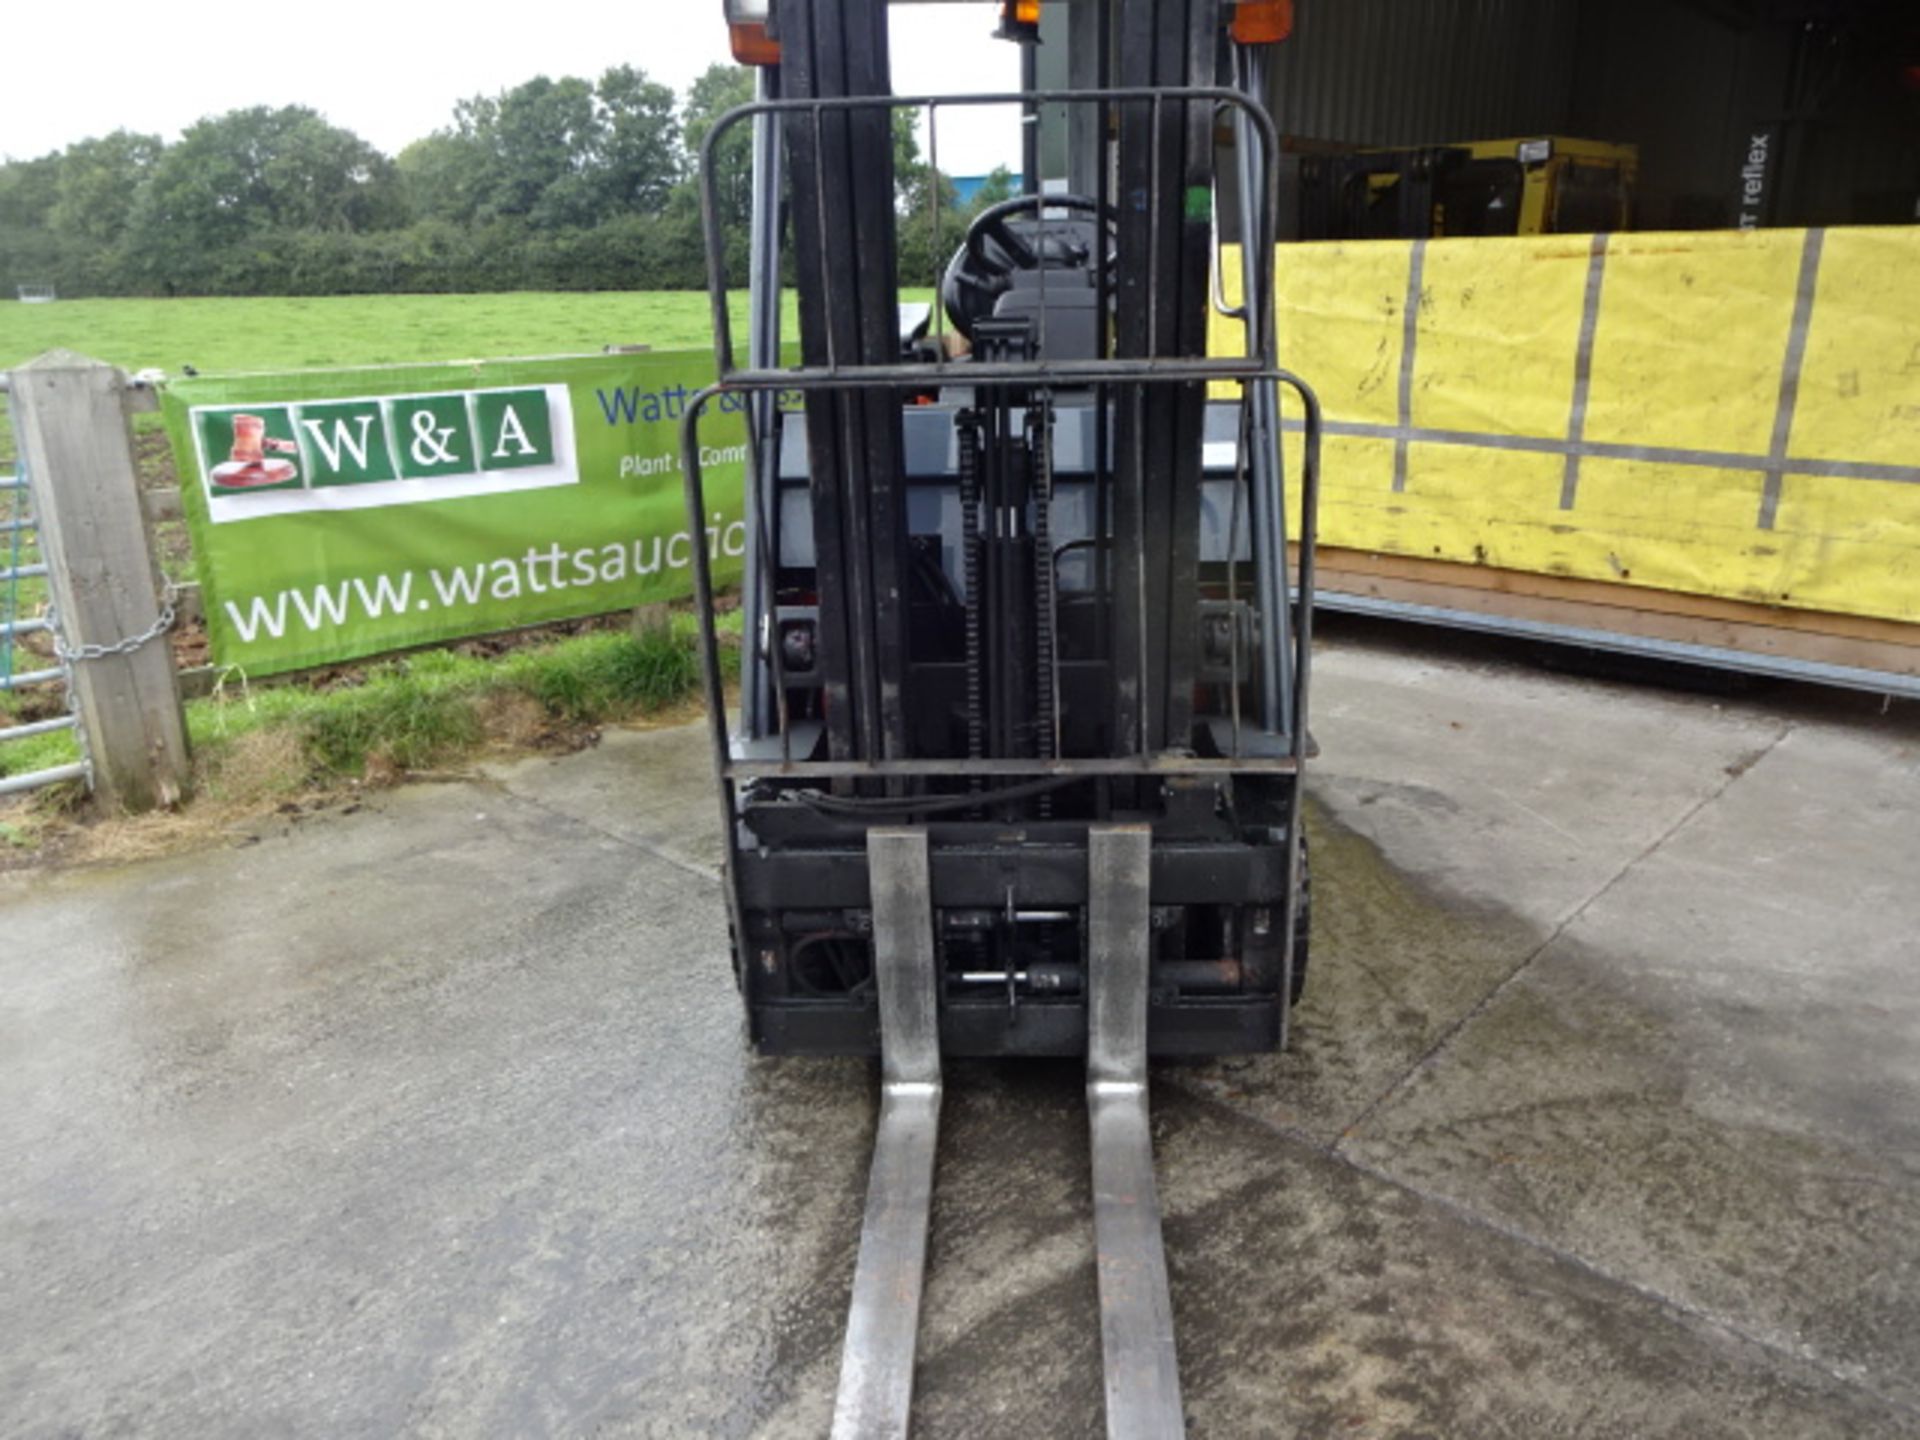 2010 TOYOTA 7-FBMF16 1.6t battery driven forklift truck S/n: E14640 with triplex free-lift, side- - Image 2 of 7